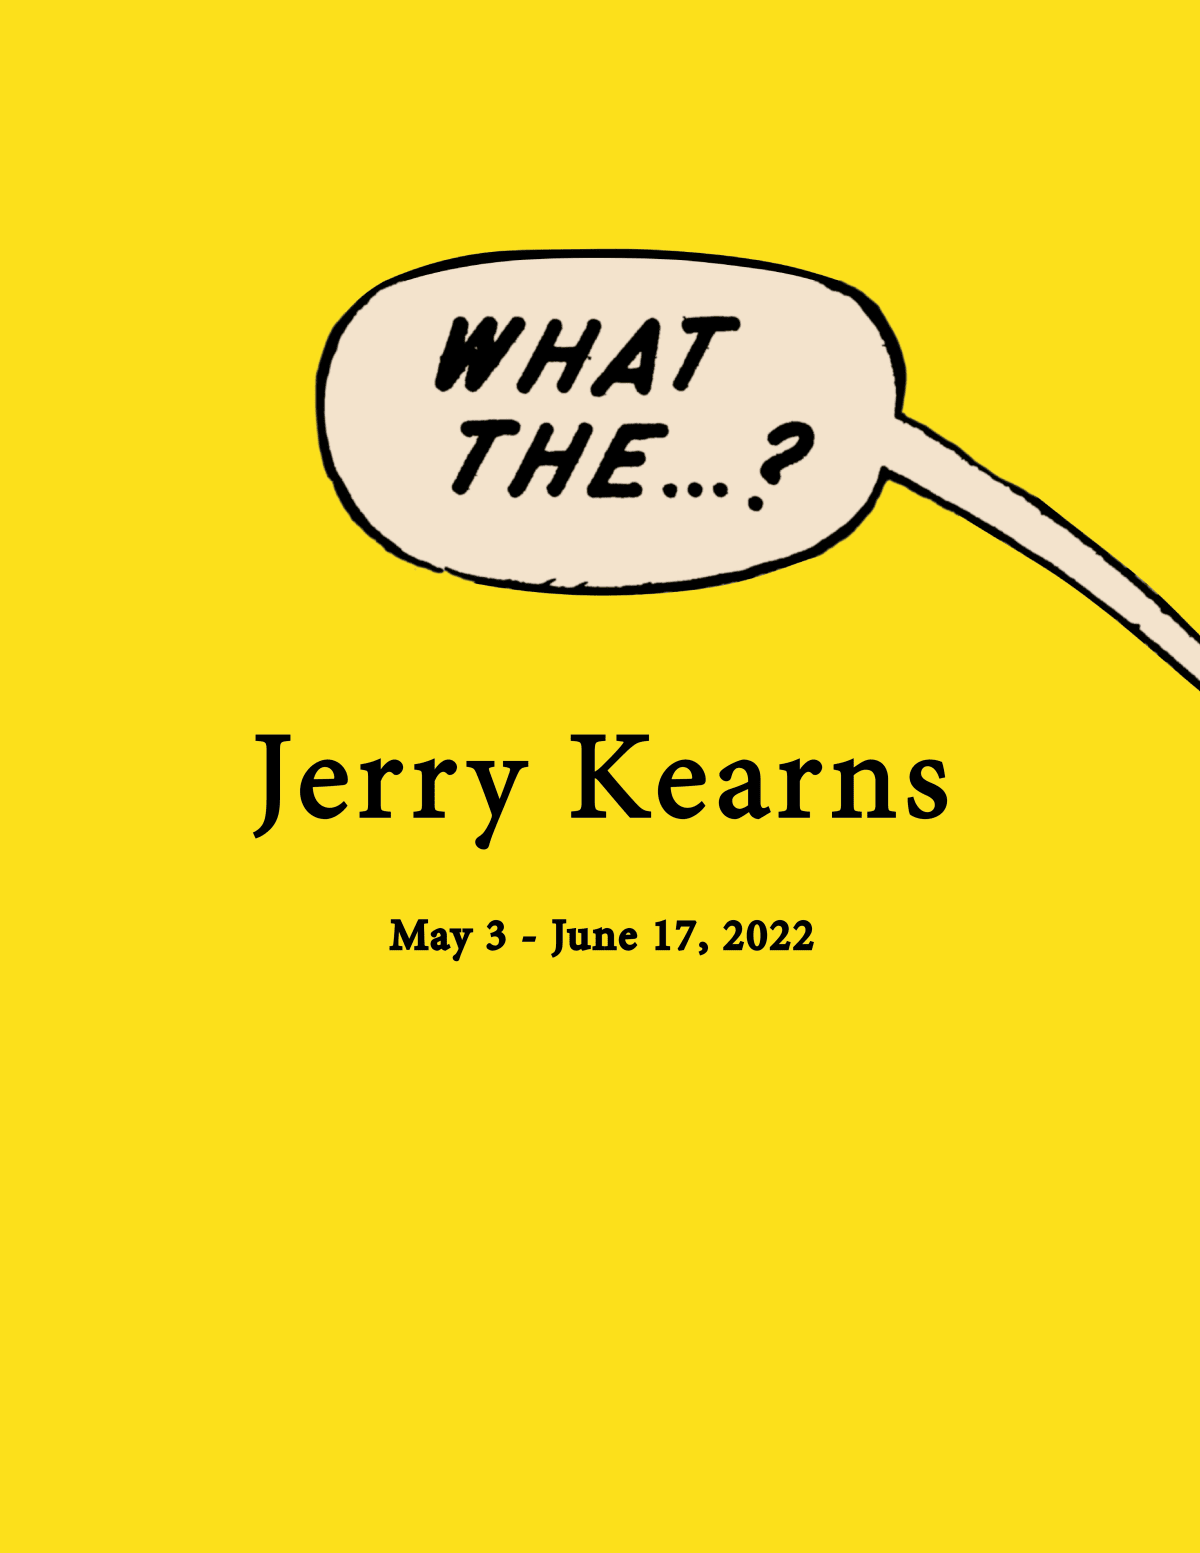 [Publication] Jerry Kearns solo exhibition "WHAT THE...?" catalogue book